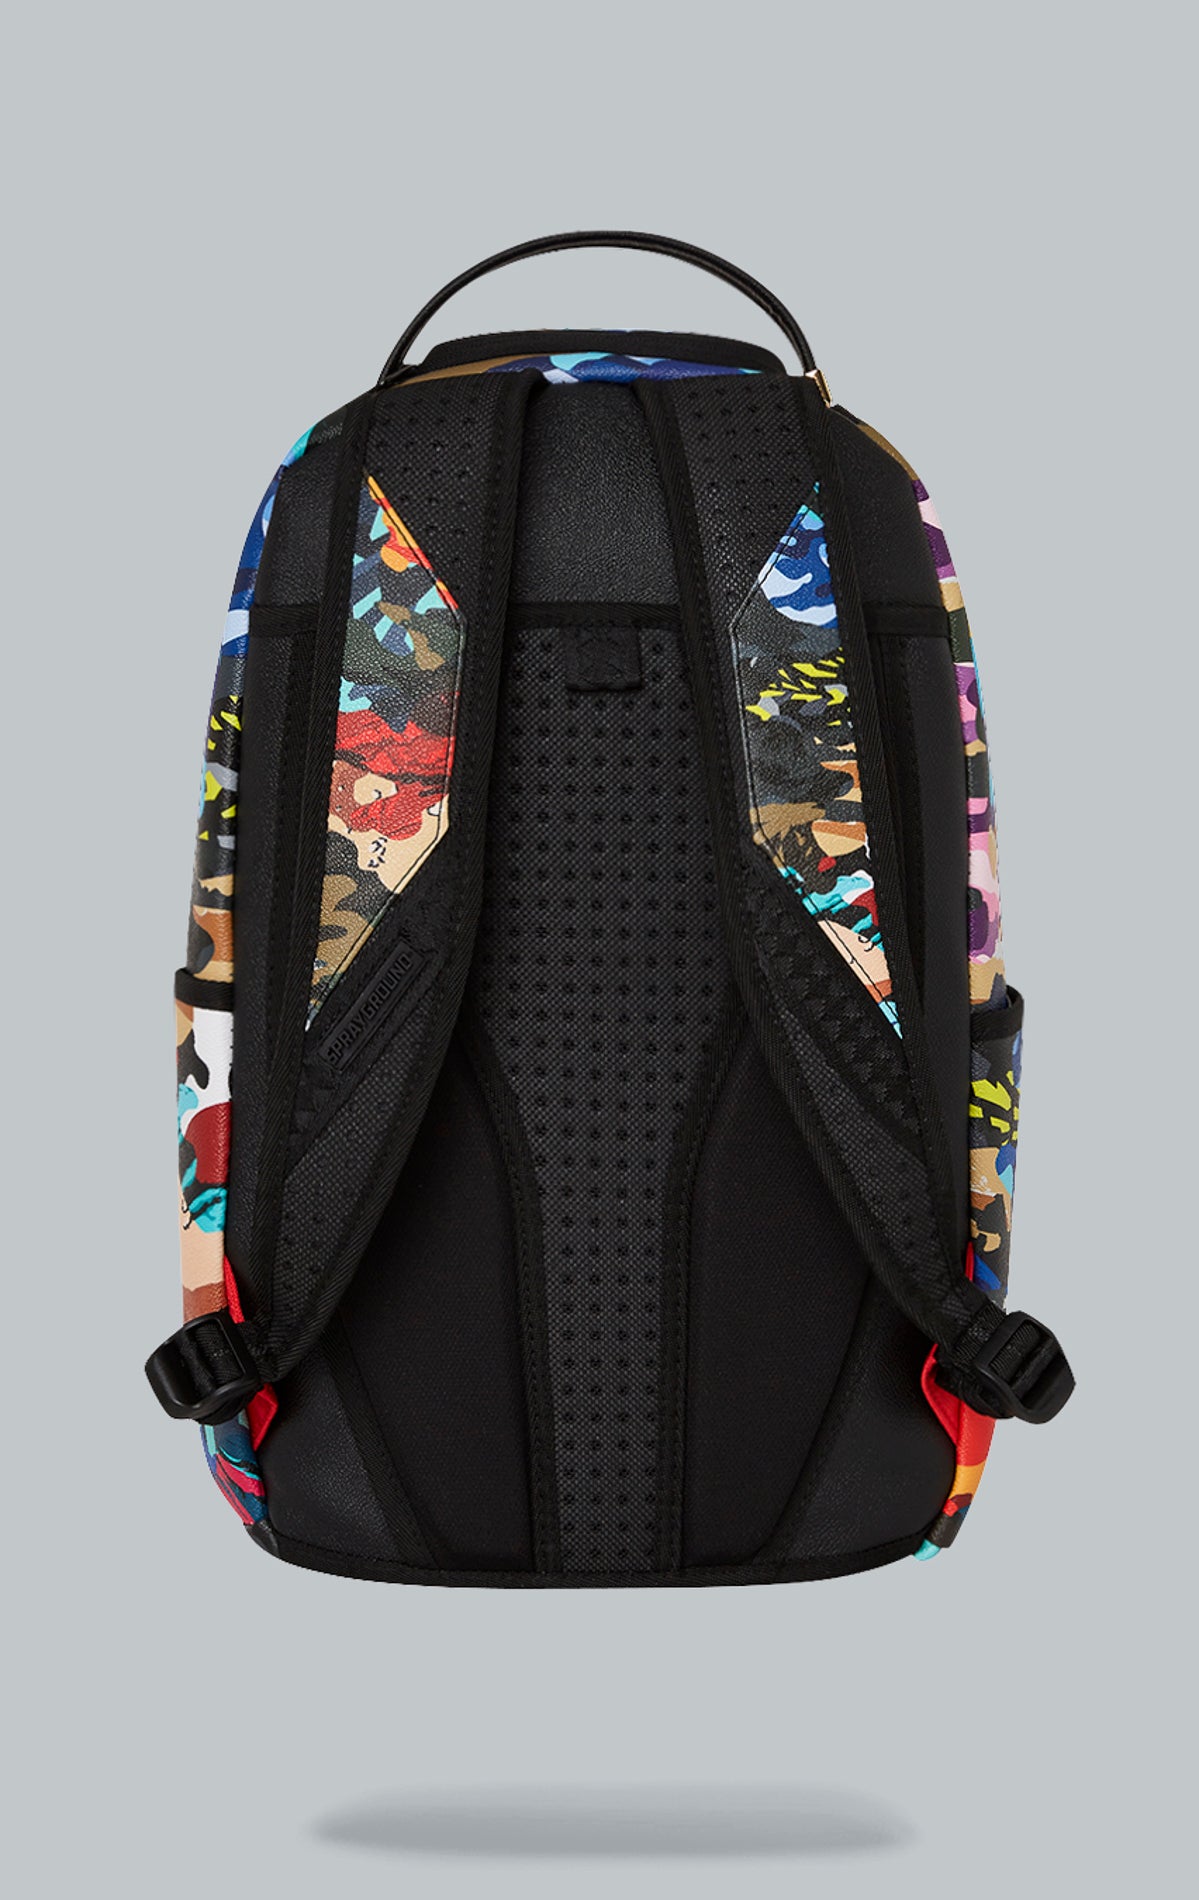 Sprayground Sliced & Dice Camo Backpack. The backpack is made from durable faux leather (100% PVC) in a camouflage print and features a variety of pockets, a separate velour sunglass compartment, ergonomic mesh back padding, adjustable straps, and a slide through back sleeve that connects to carry-on luggage.  pen_spark     tune  share   more_vert